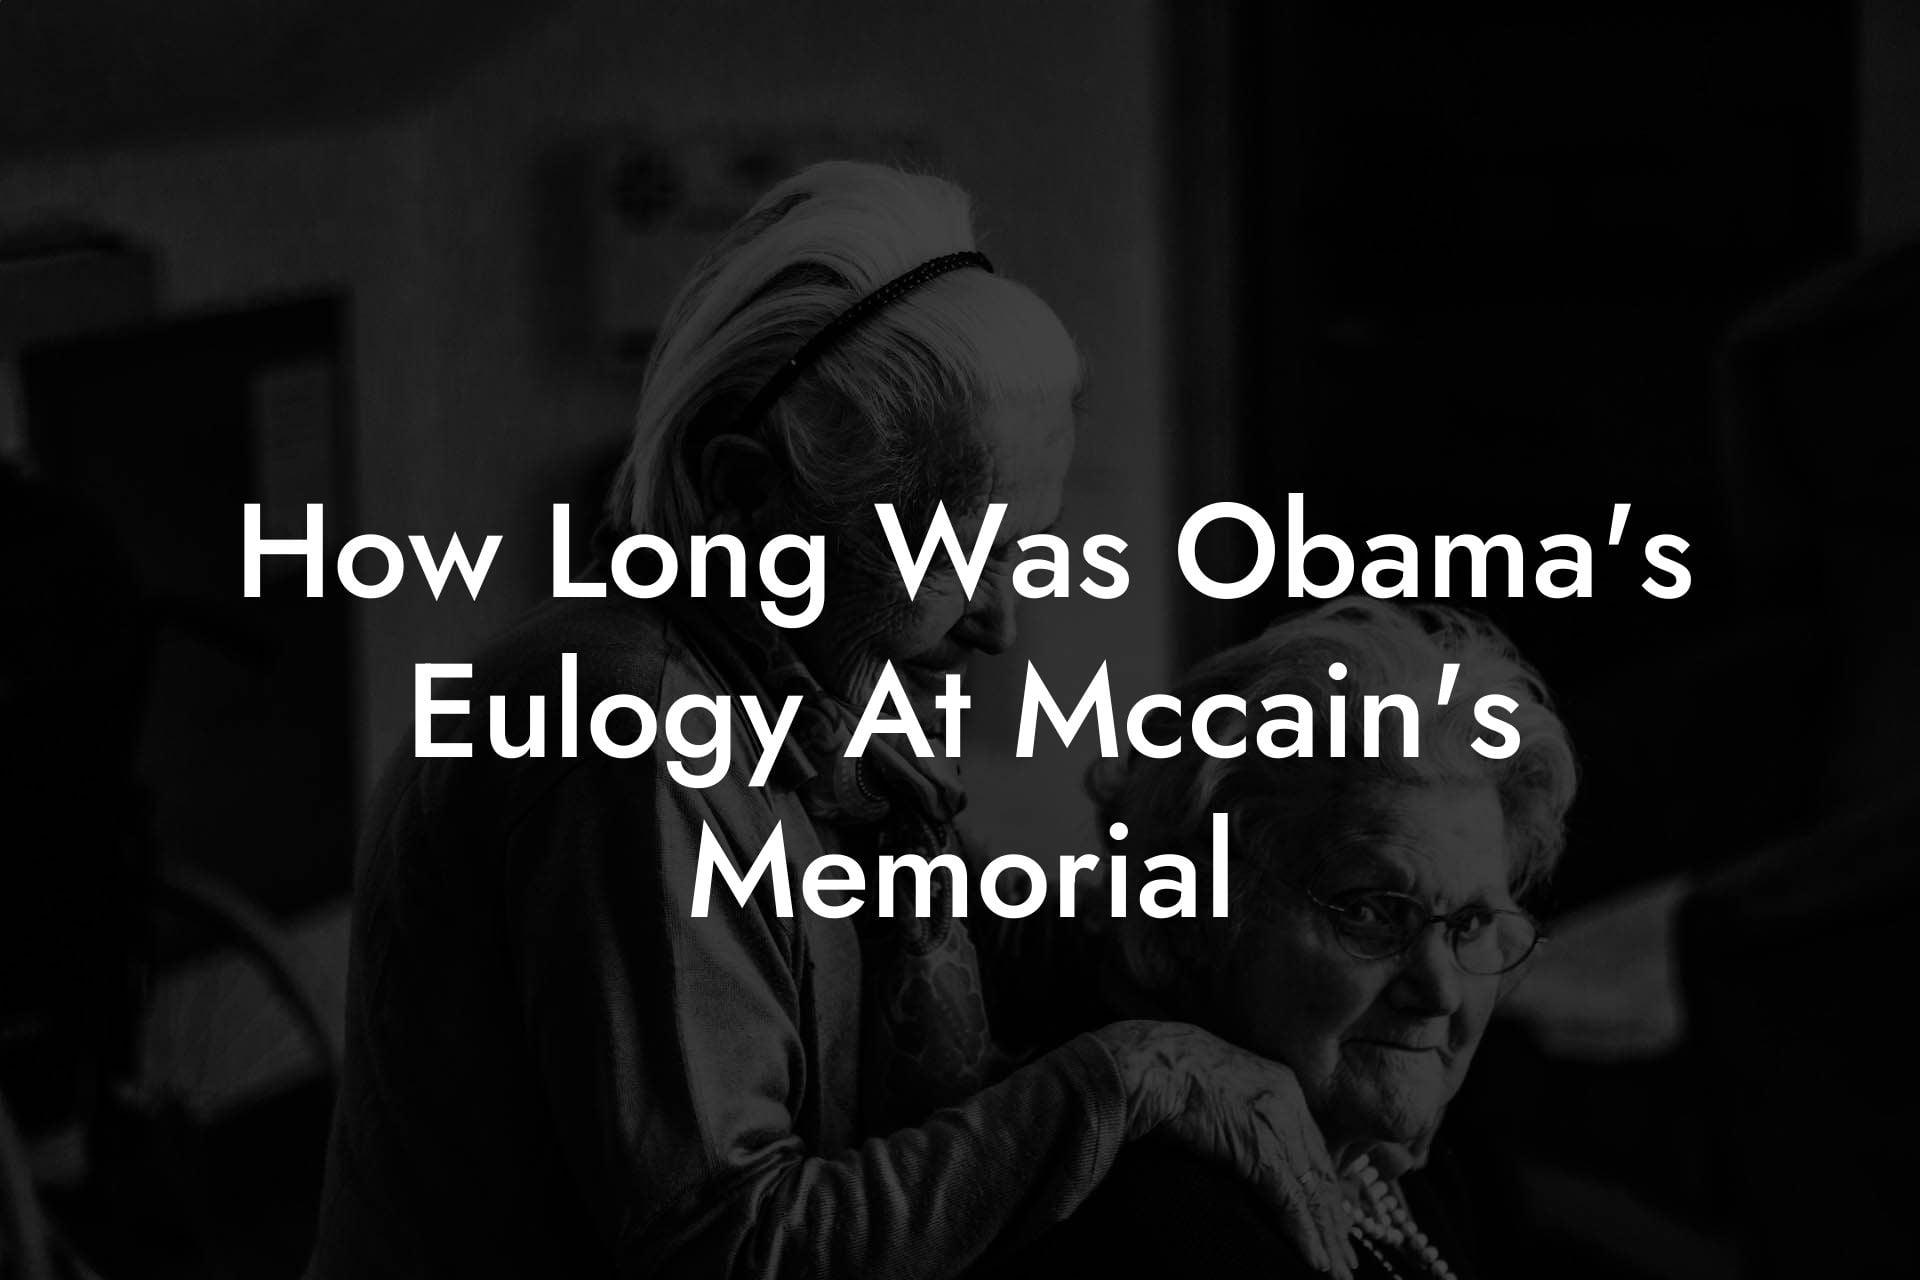 How Long Was Obama's Eulogy At Mccain's Memorial